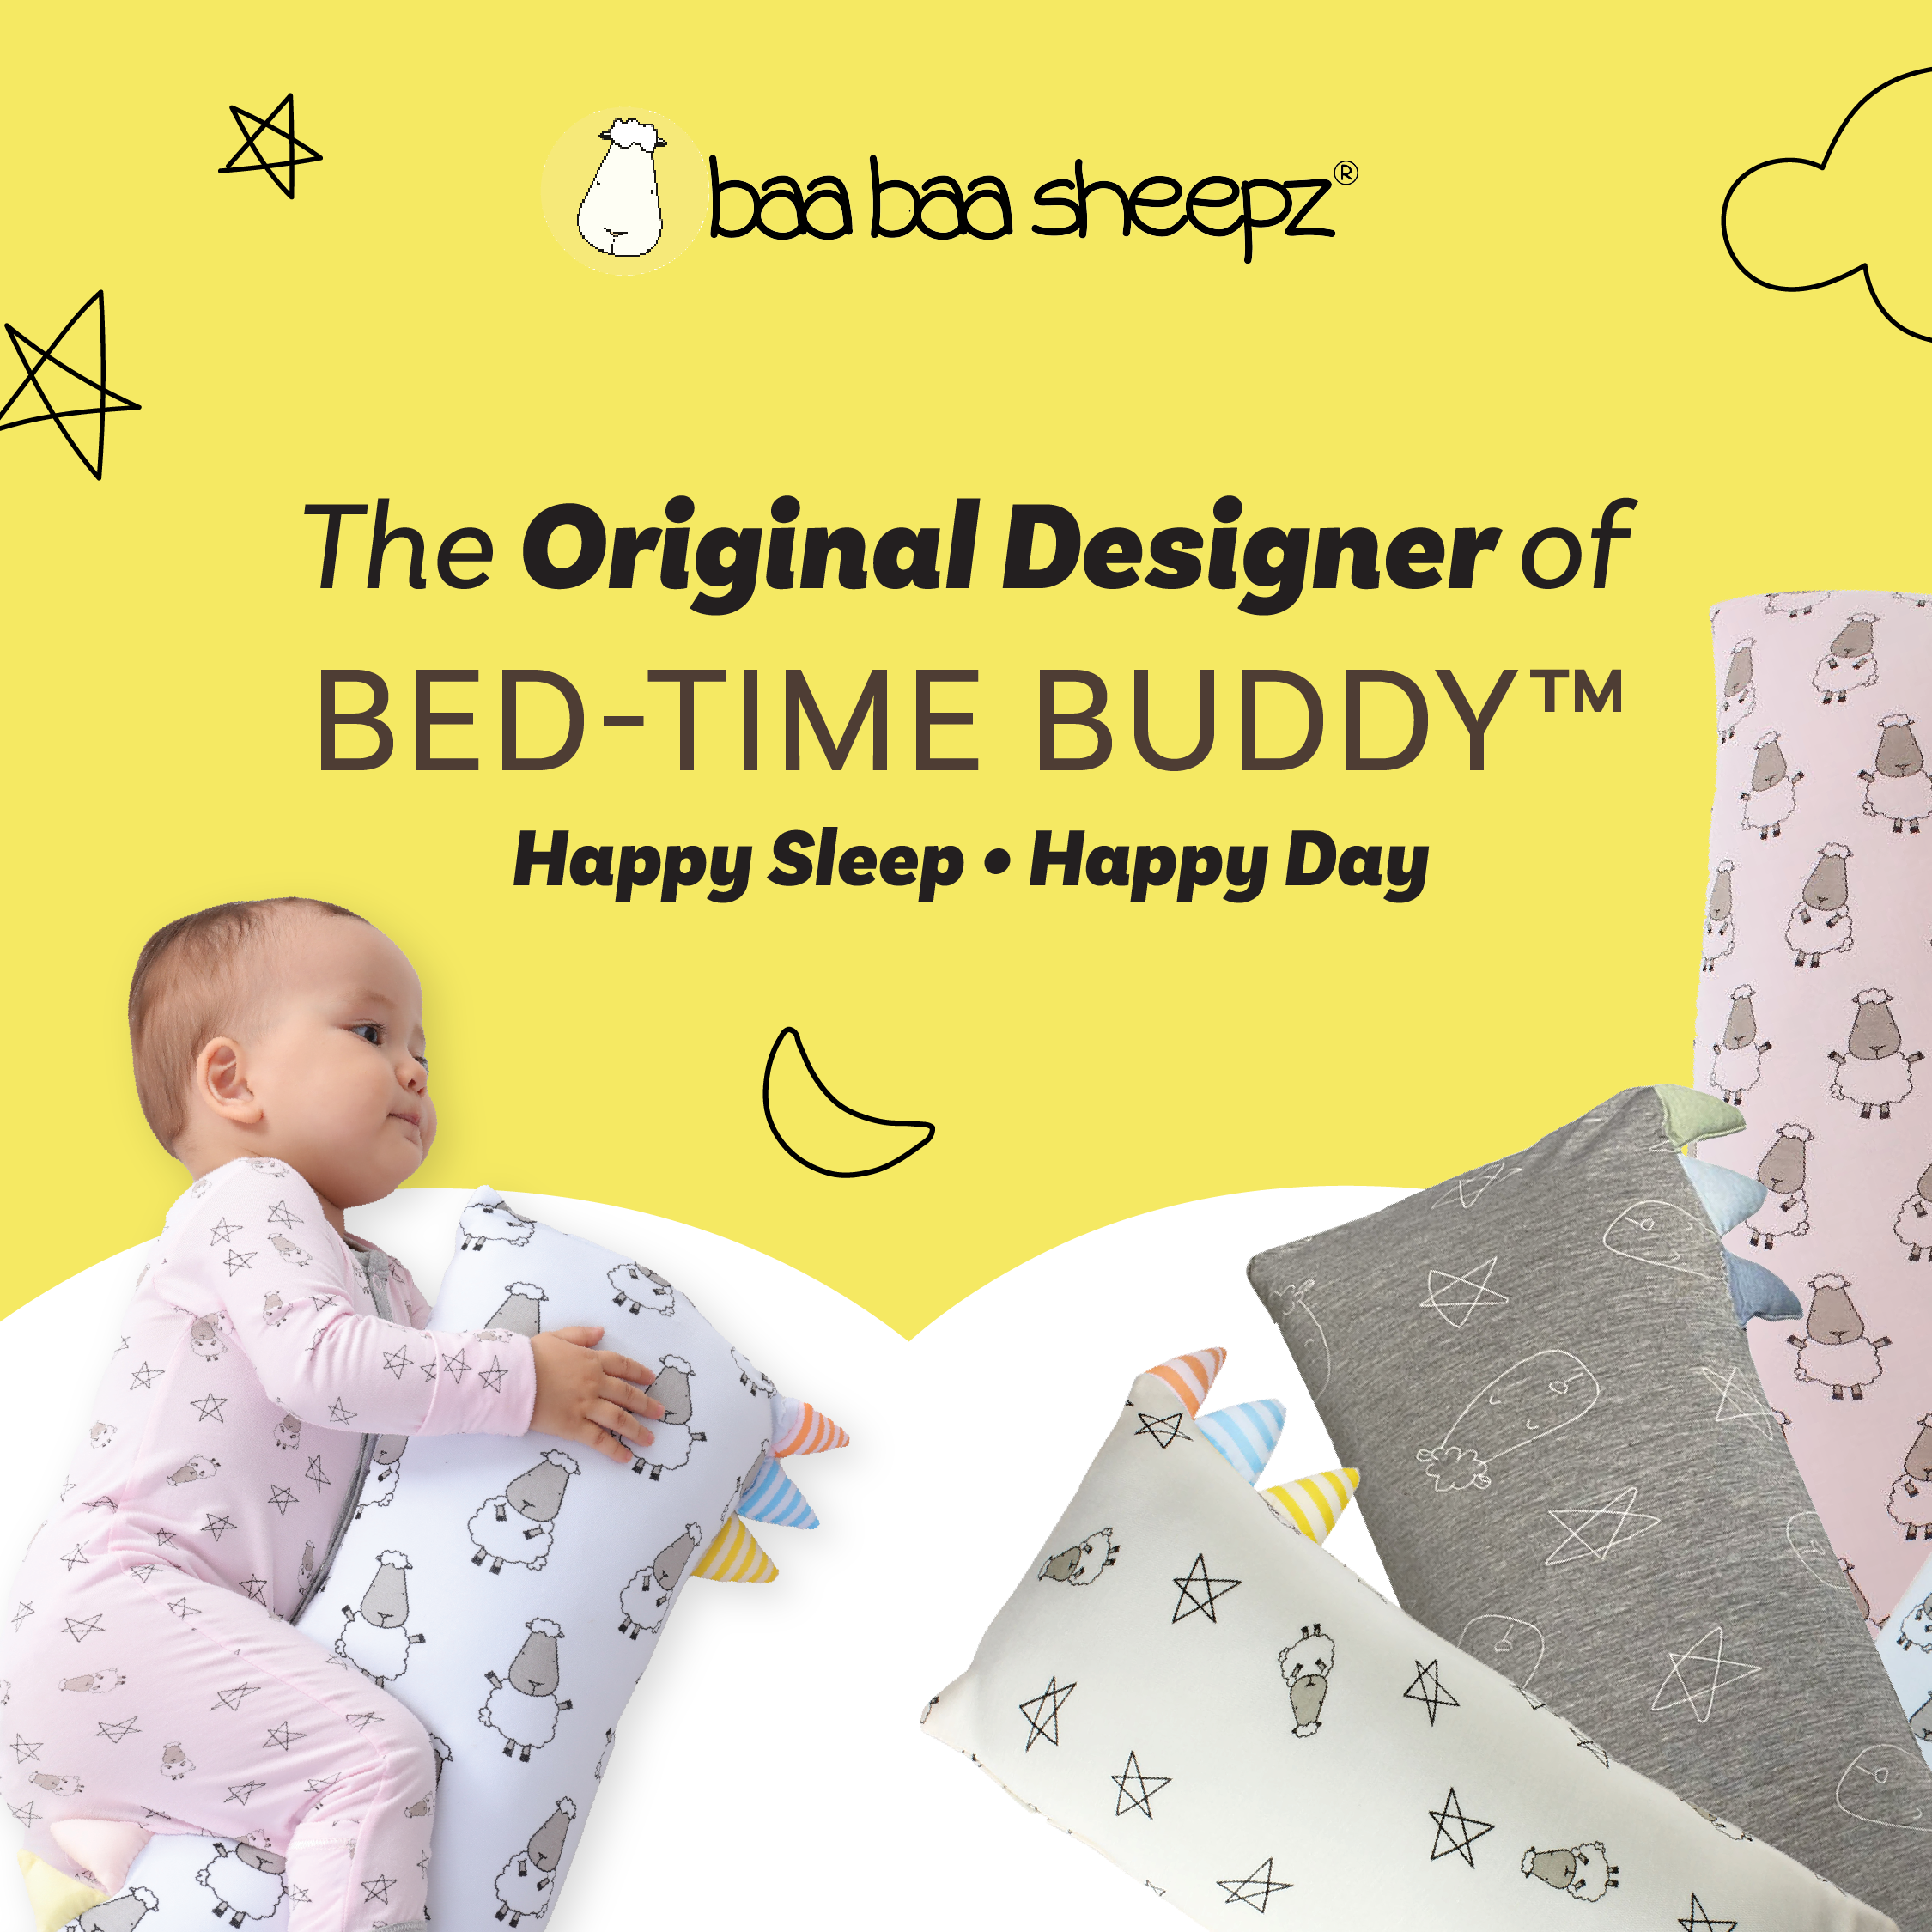 Bed-Time Buddy™ Small Star & Sheepz Yellow with Color & Stripe tag - Medium (size 18x38cm)